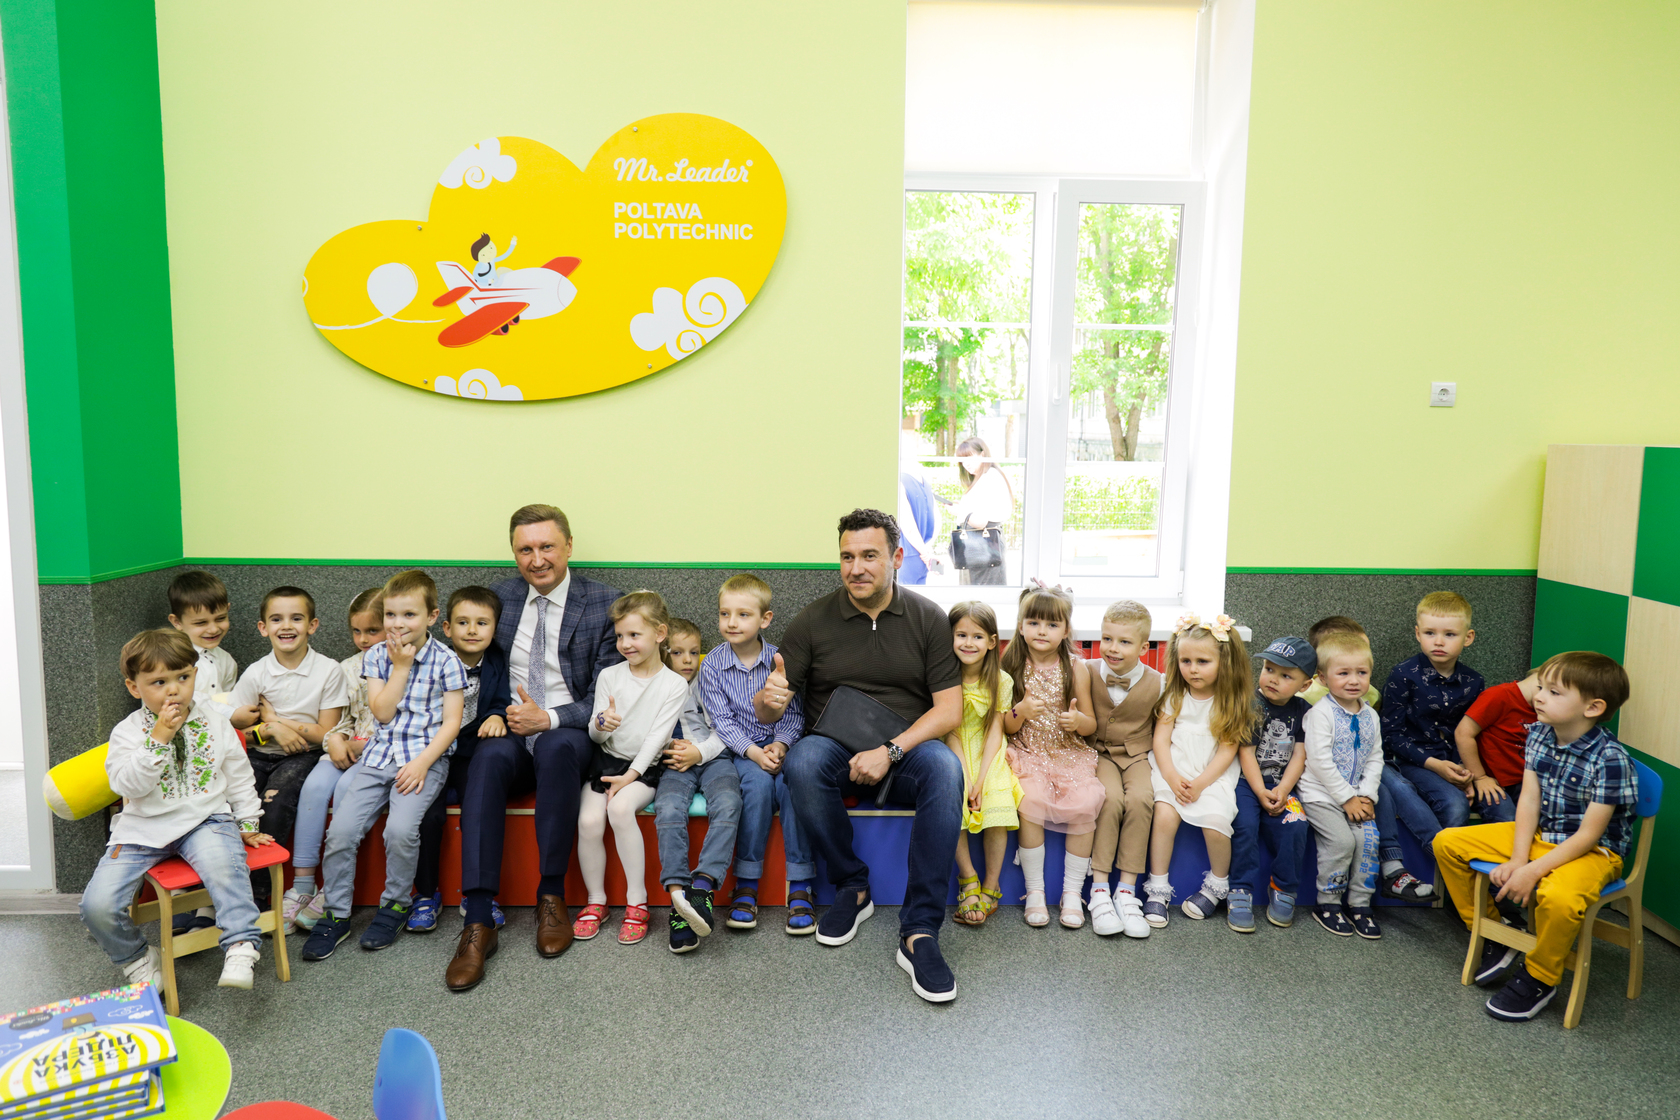 Innovative children’s space is opened at the Poltava Polytechnic as part of the second phase of the Center for Education and Care of Preschool Children Mr.Leader